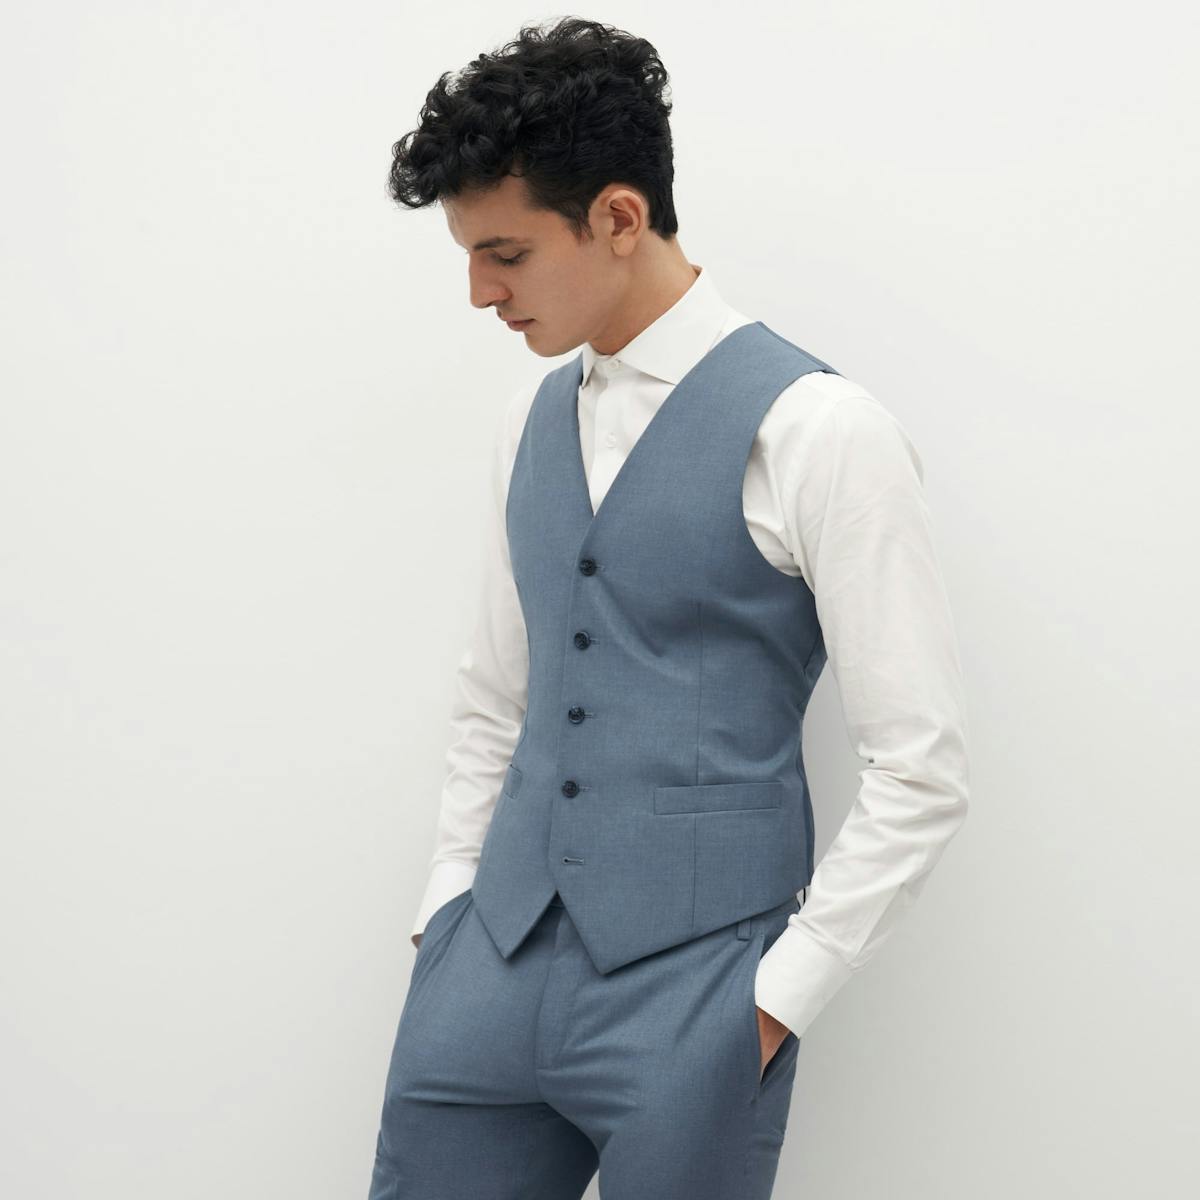 Light blue suit vest for menswear holiday party outfit.